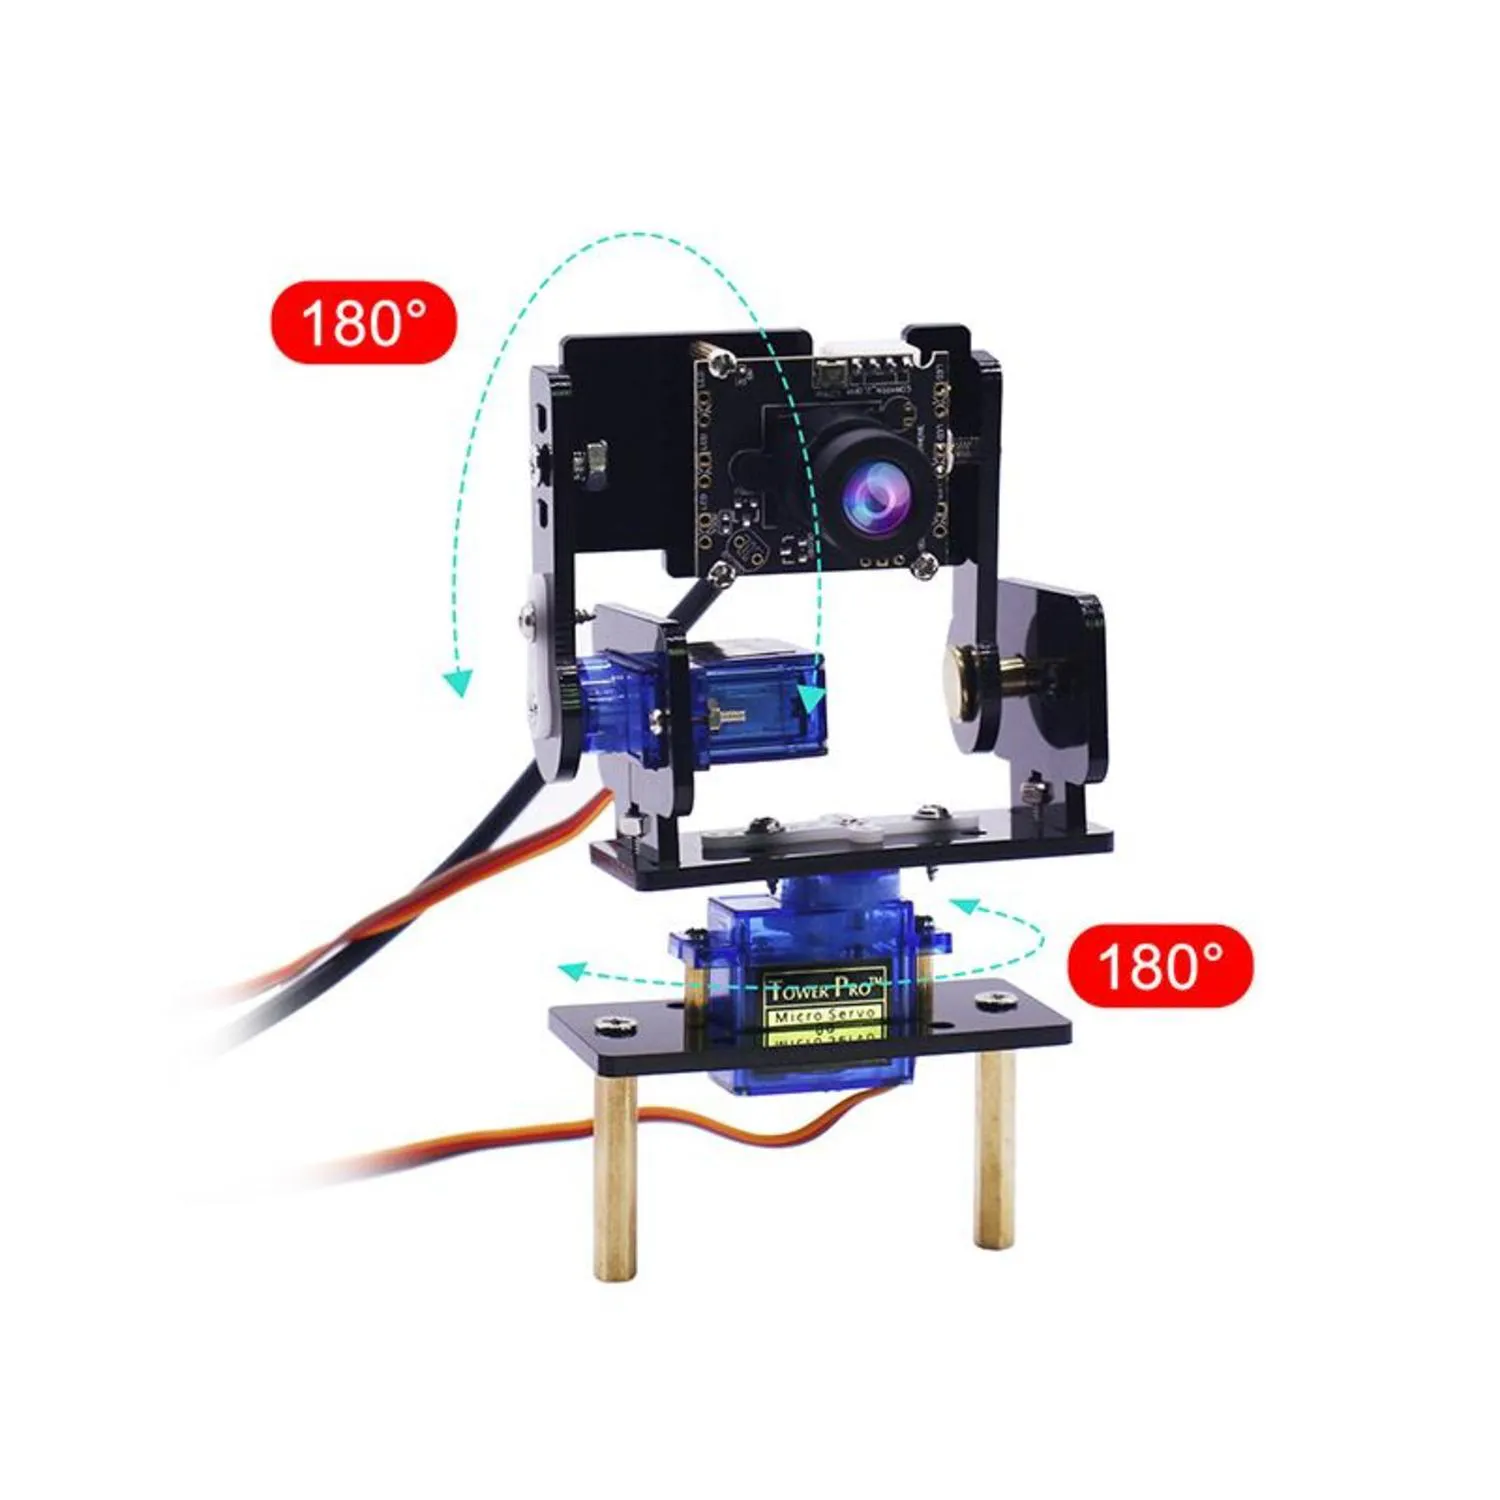 Photo of Yahboom HD Camera Pan-Tilt Kit with 2 Pcs SG90 Micro Servos for robot car